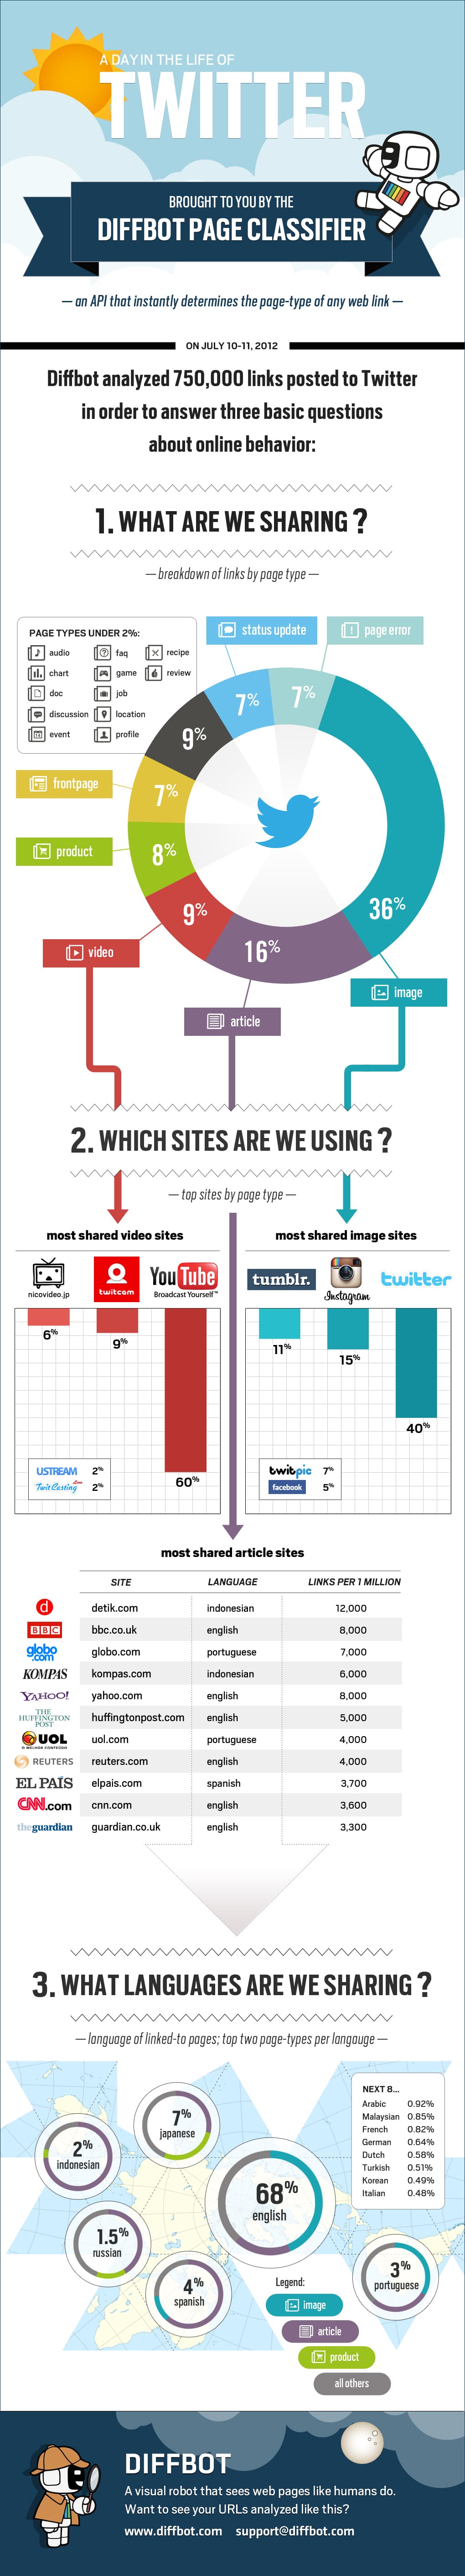 Most Popular Link Sources Shared On Twitter [Infographic]